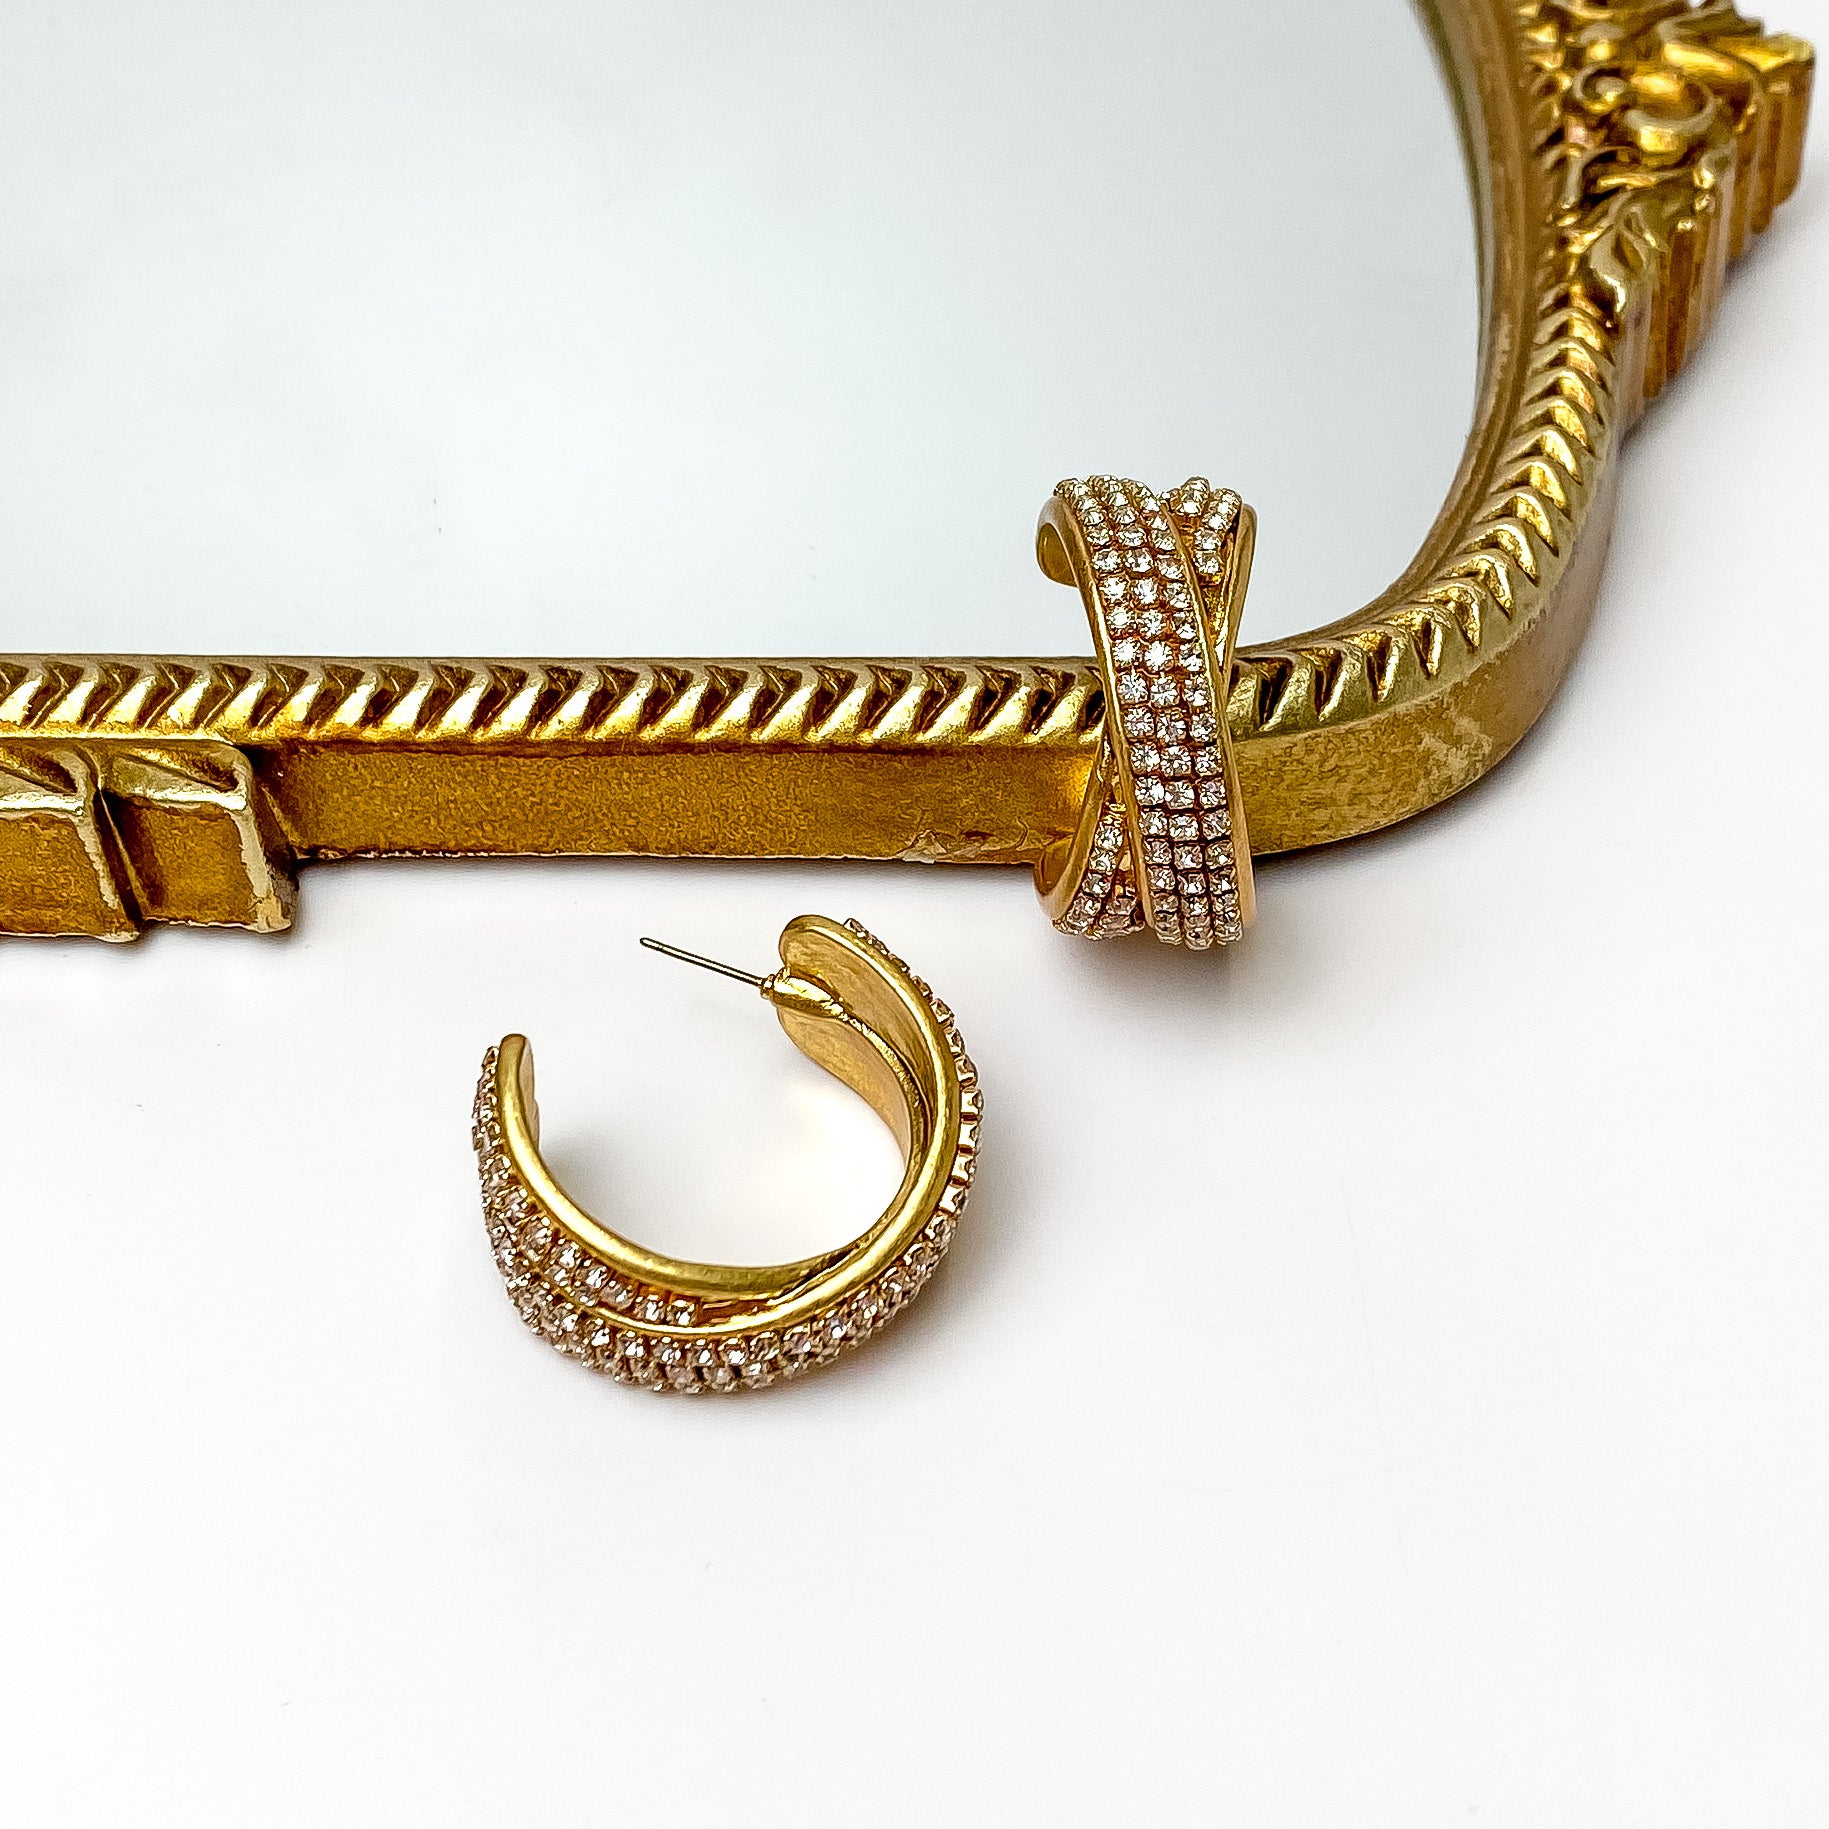 Two gold bands that are covered in clear crystals are crossed in the center and formed to make hoop earrings. These earrings are pictured on a white background with a gold mirror at the top of the picture. 